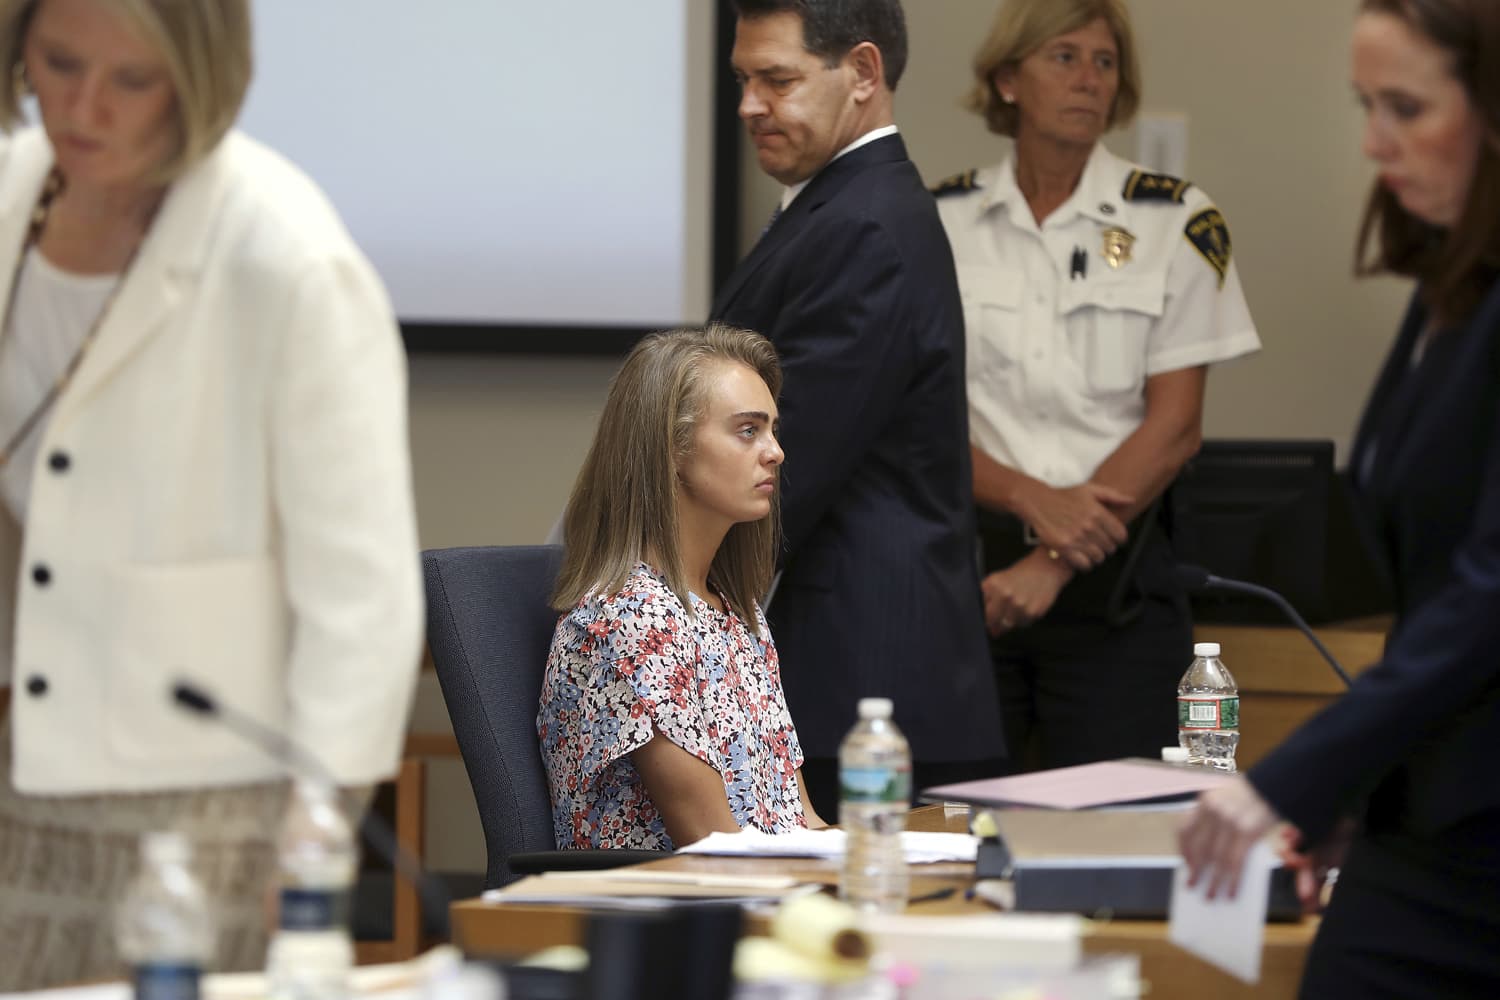 Michelle Carter is charged with involuntary manslaughter for encouraging 18-year-old Conrad Roy III to kill himself in July 2014. (Pat Greenhouse/The Boston Globe via AP, Pool)